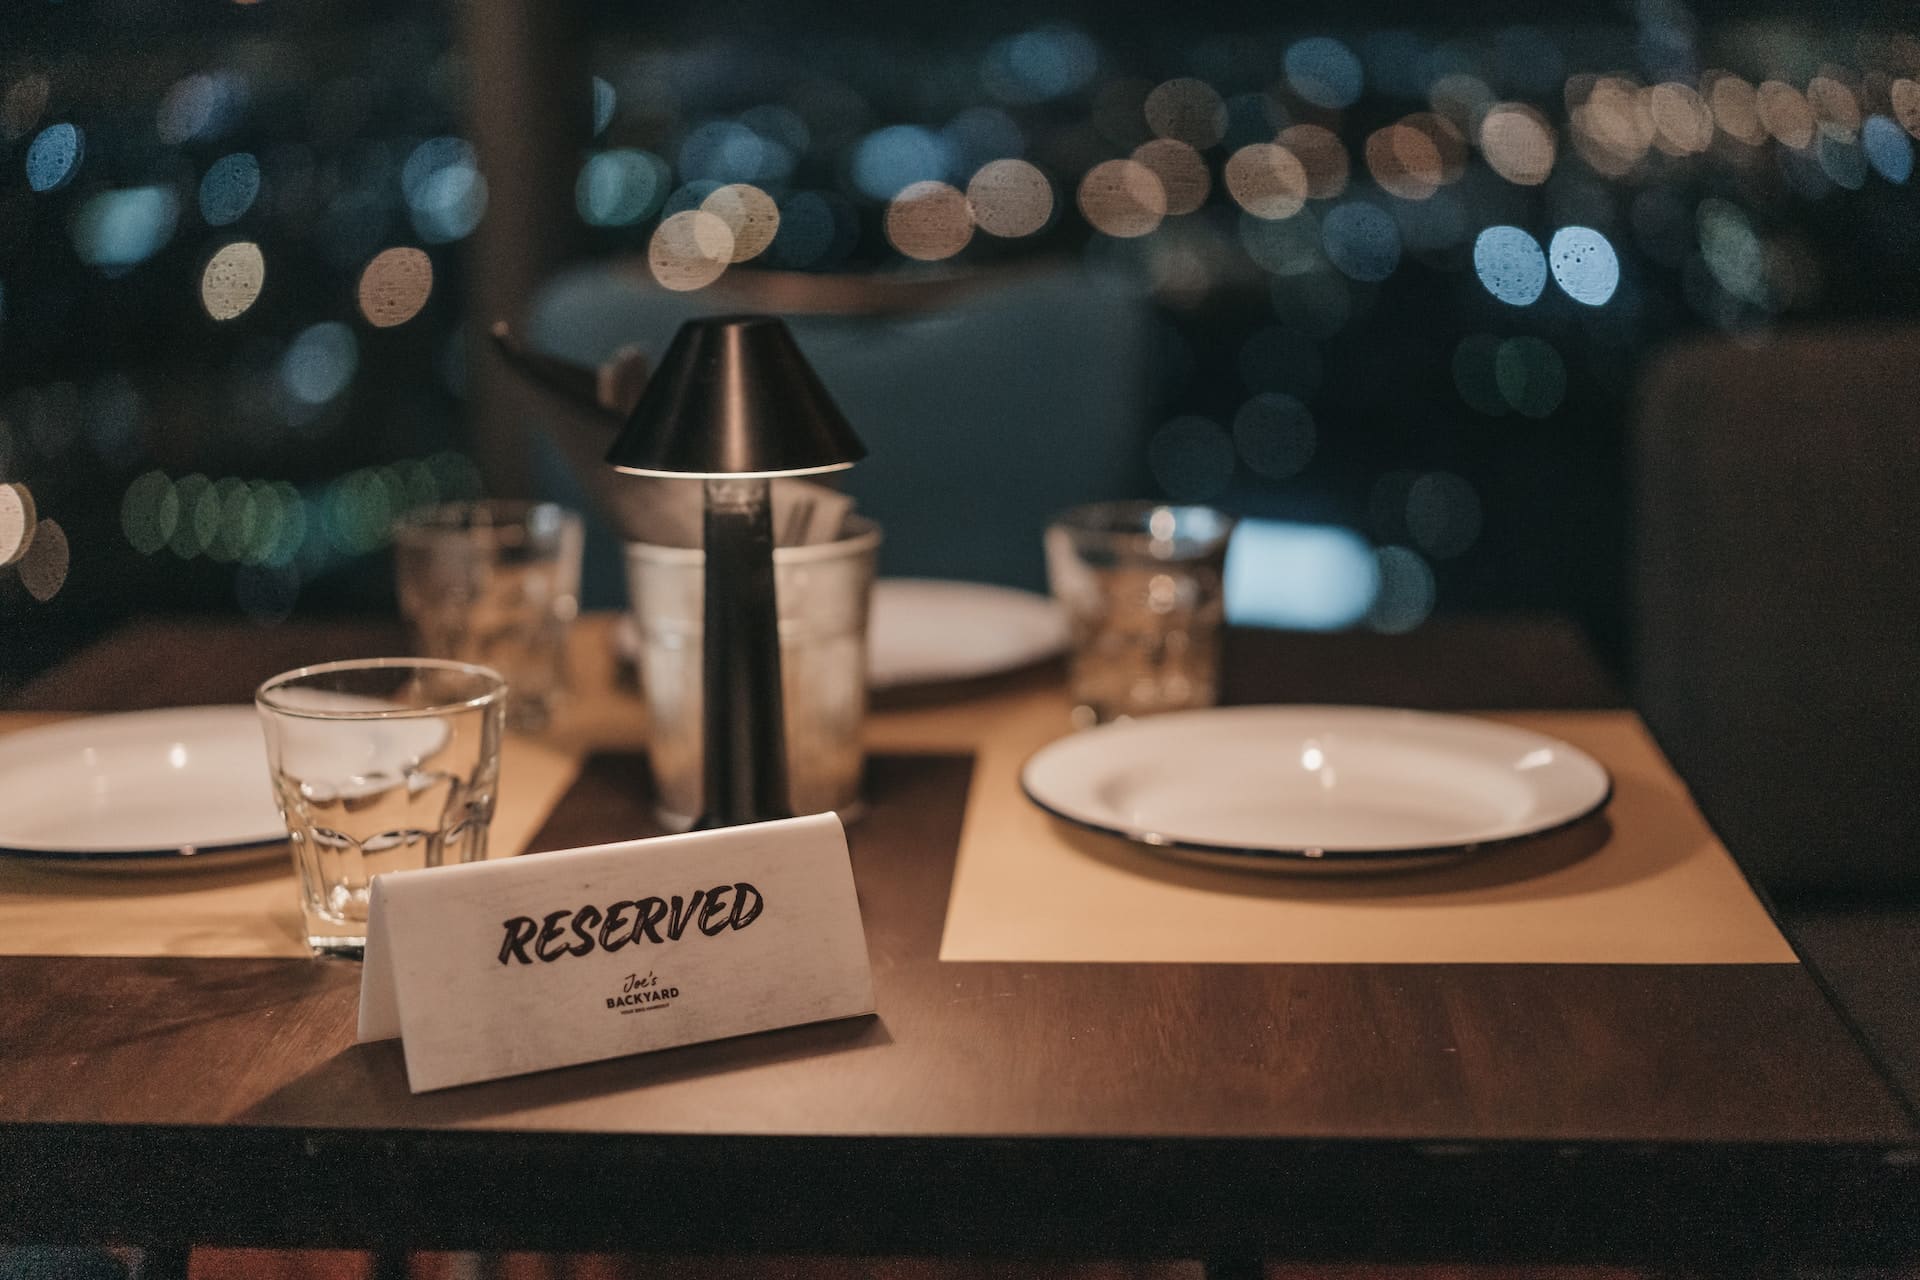 Empty table with plates and a sign reserved